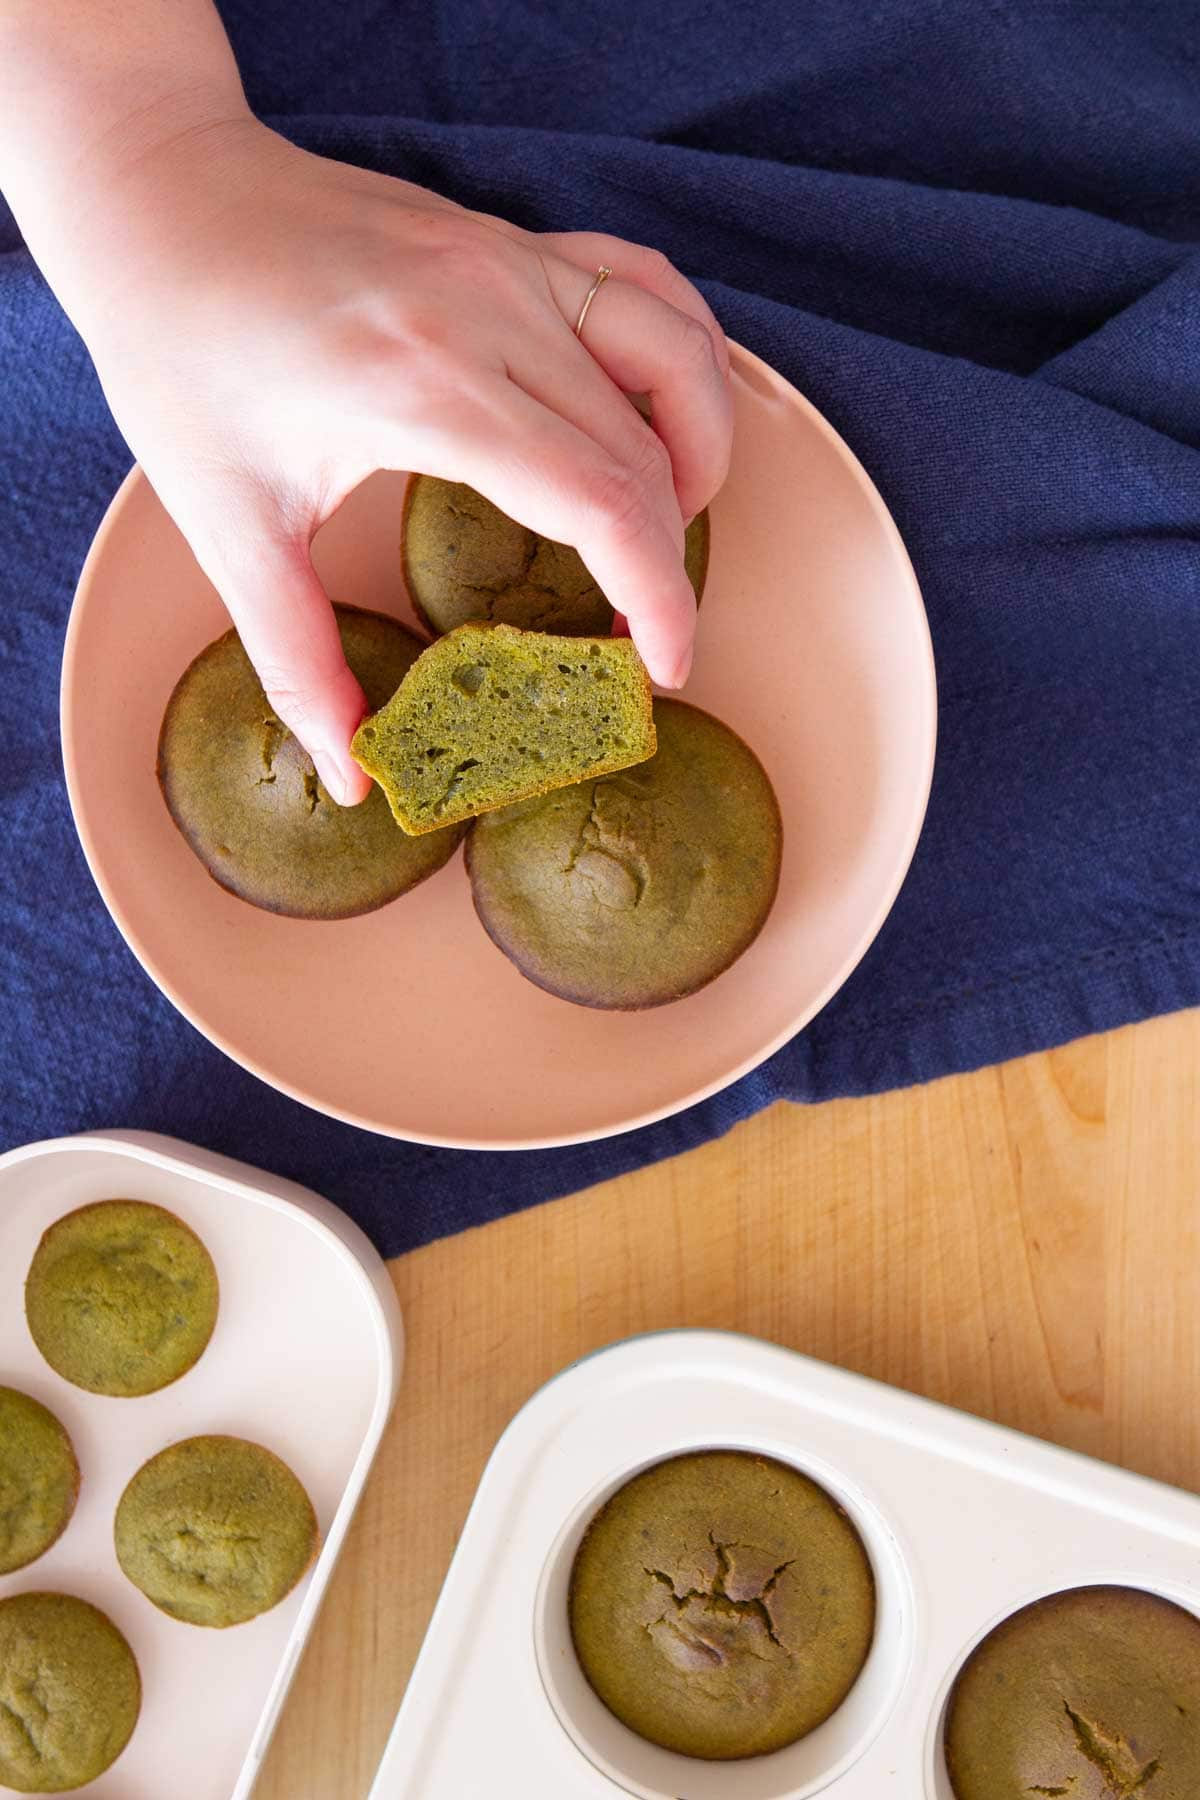 Top down view of stacked matcha mochi muffins in a pink serving plate, with a hand holding one cut in half to show the golden crust on the outside and moist center, along with muffins still in the pan and mini ones on the side.